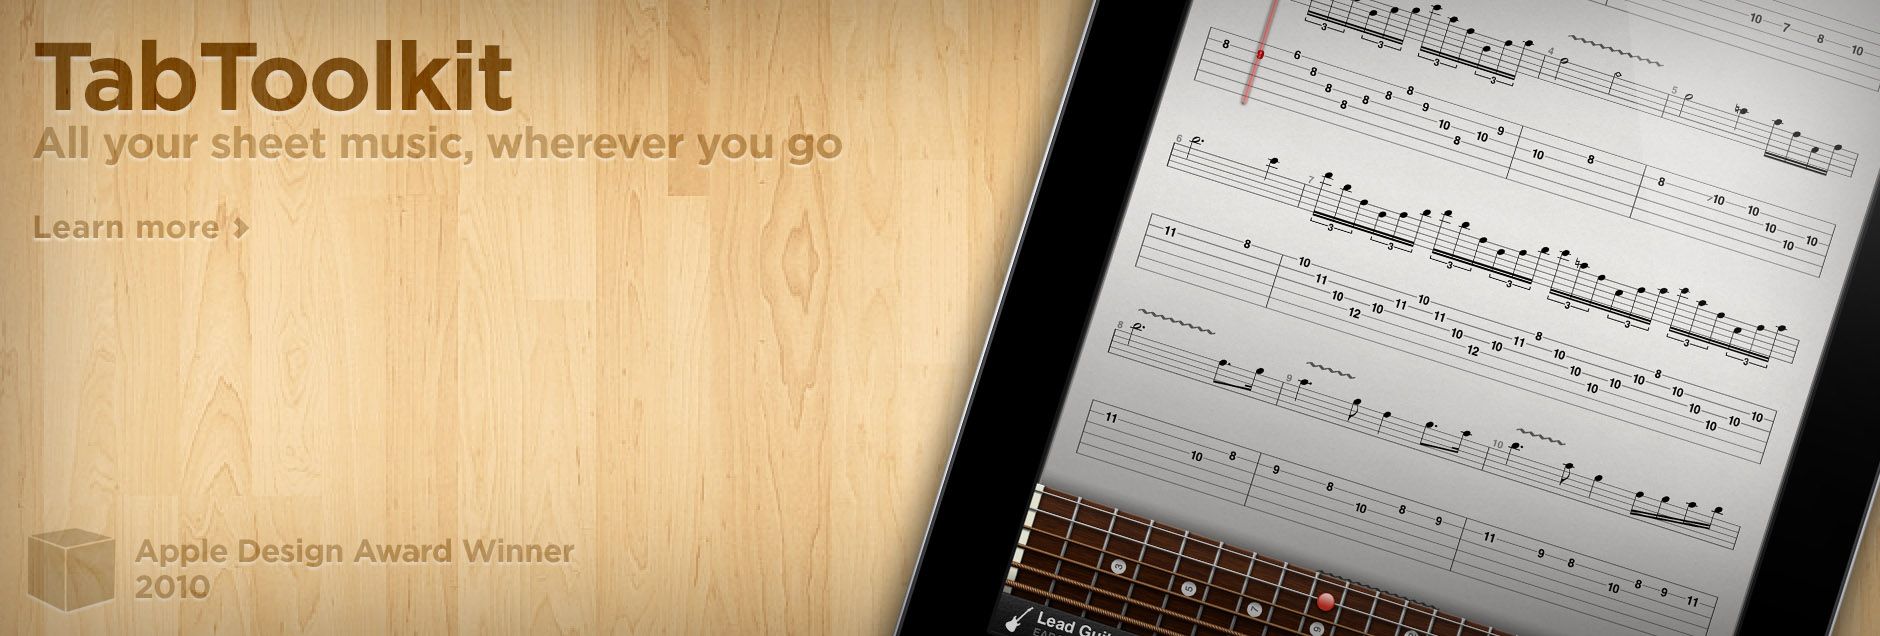 TabToolkit - All your sheet music wherever you go